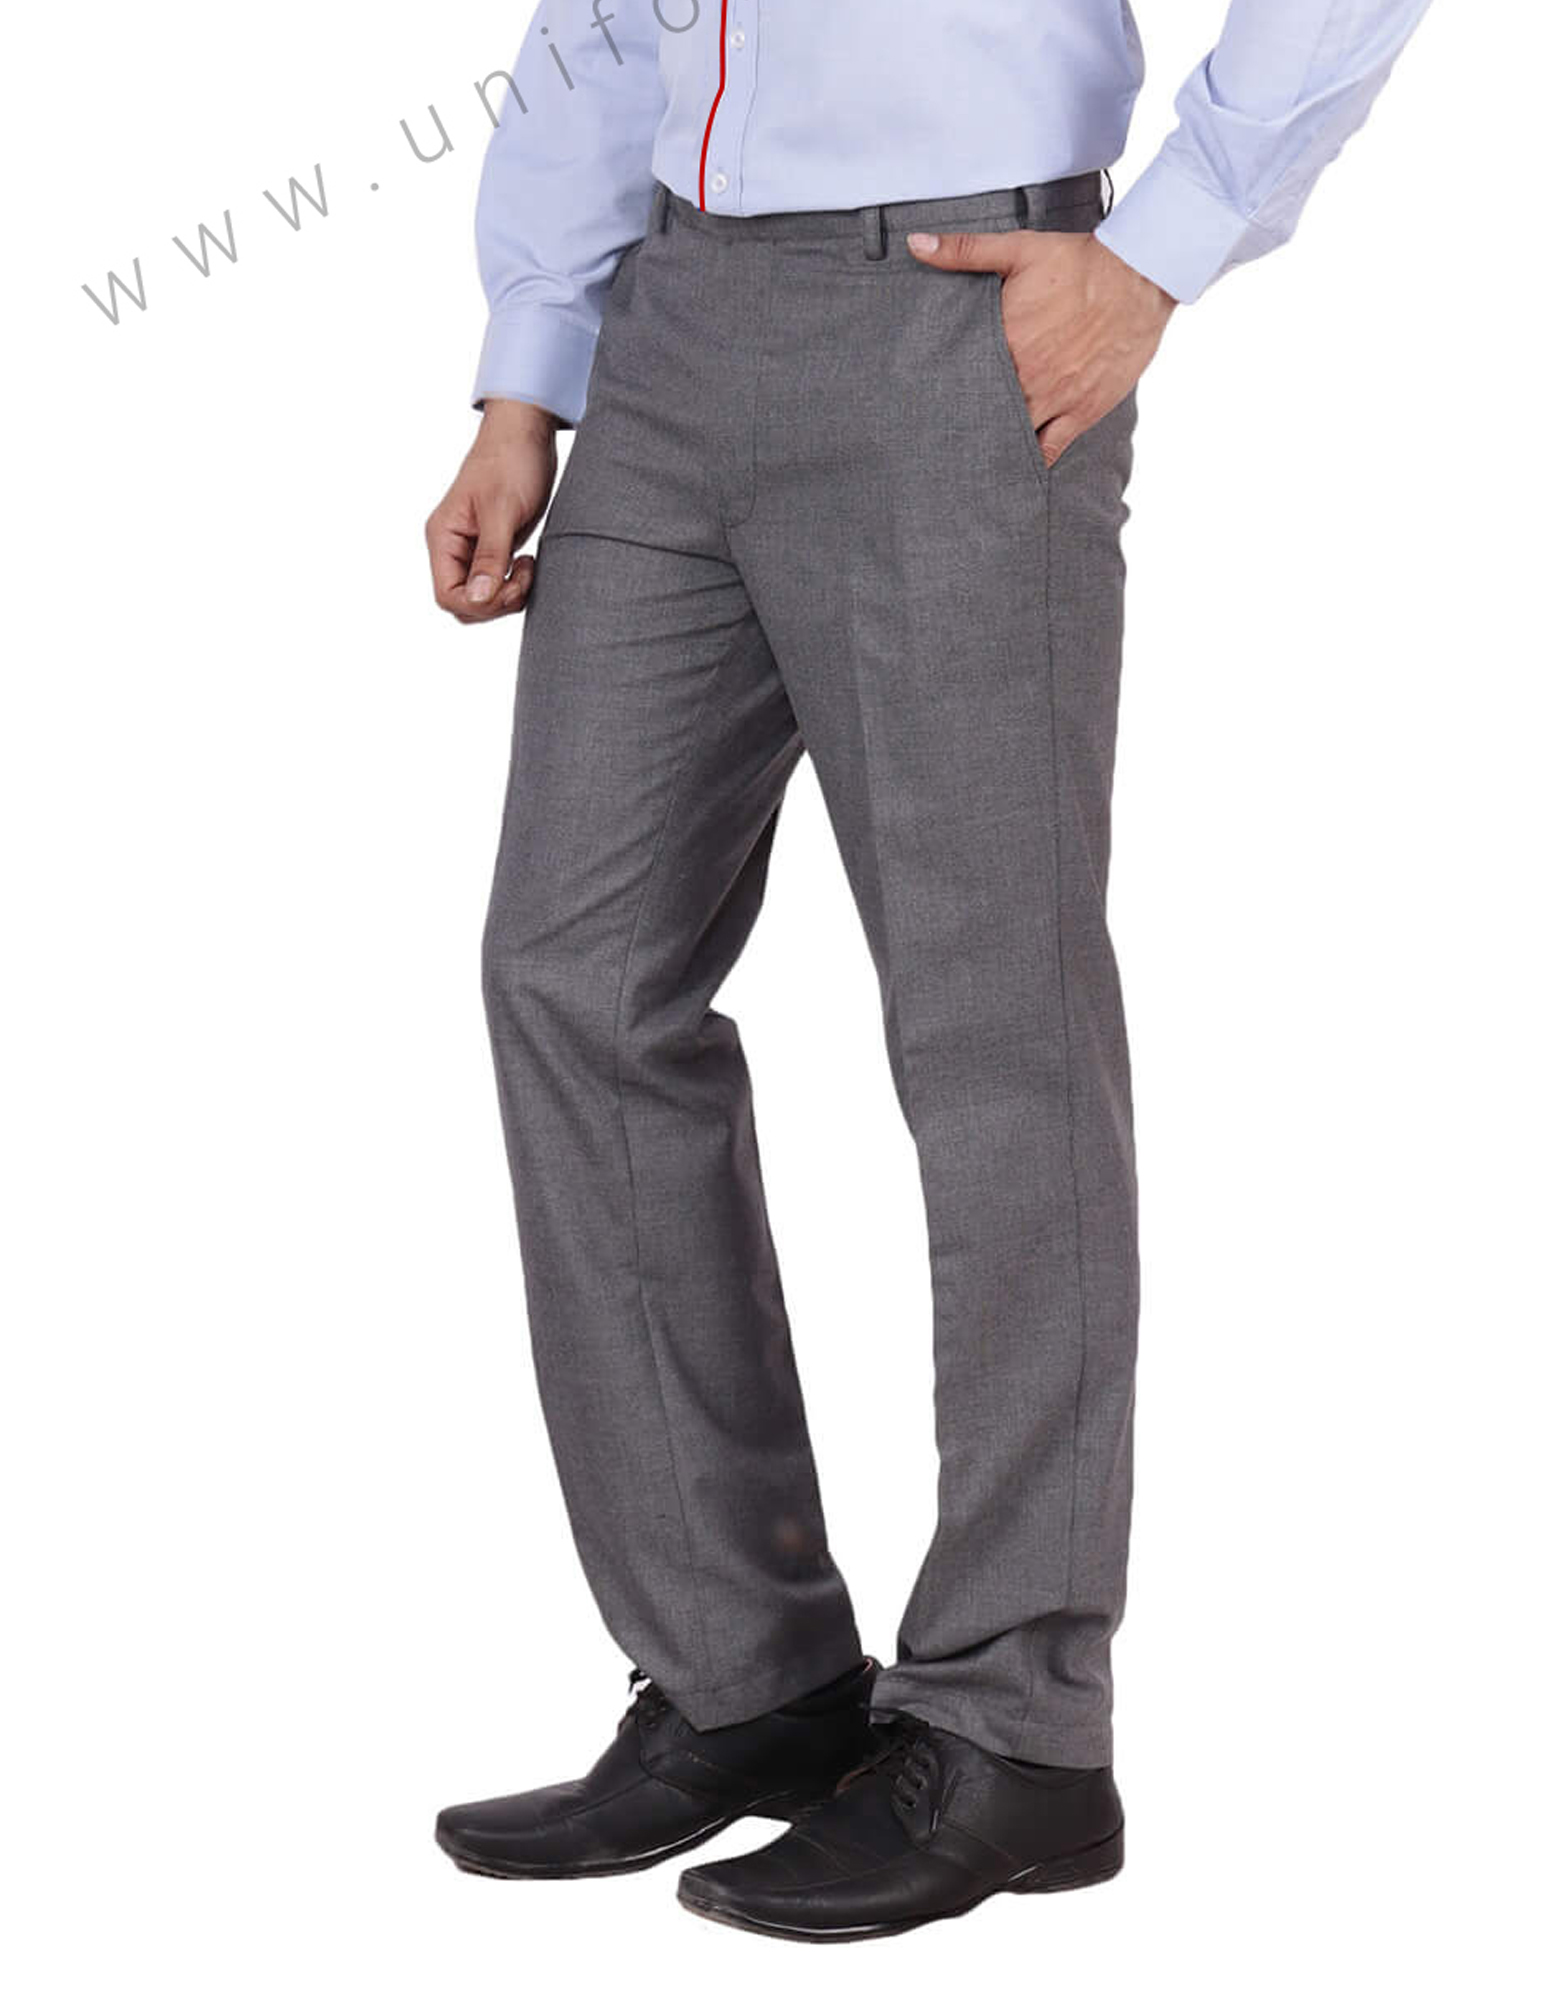 Aggregate more than 74 light grey trousers super hot - in.cdgdbentre